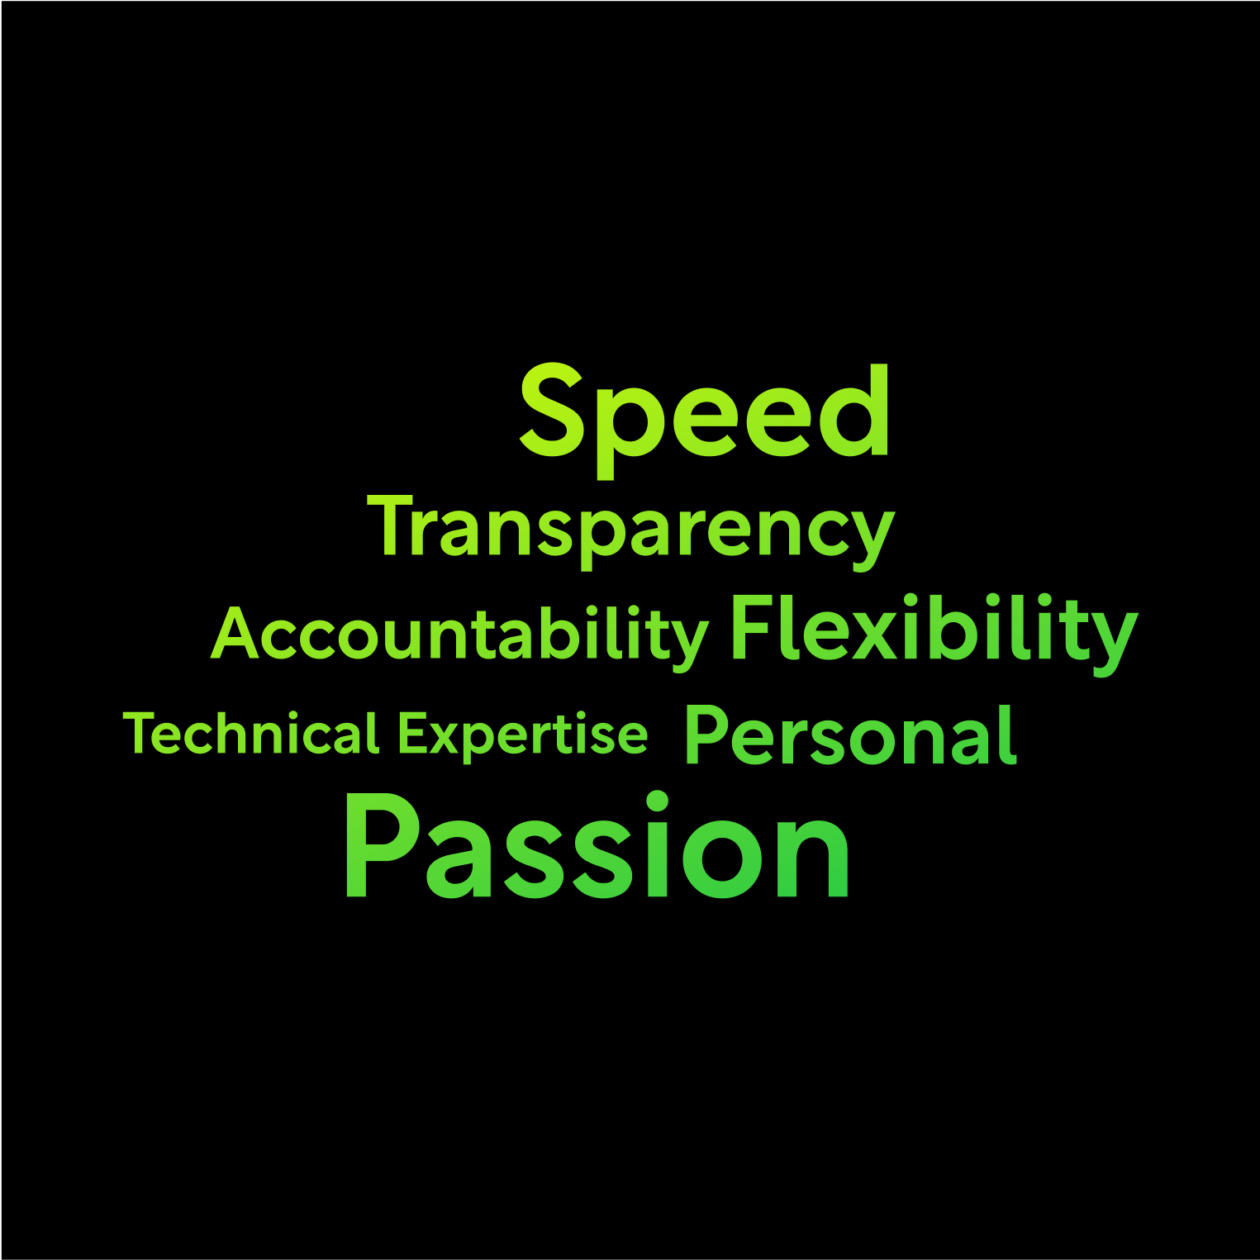 Next Level - Our Values: Passion Speed Transparency Accountability Flexibility Technical Expertise Personal